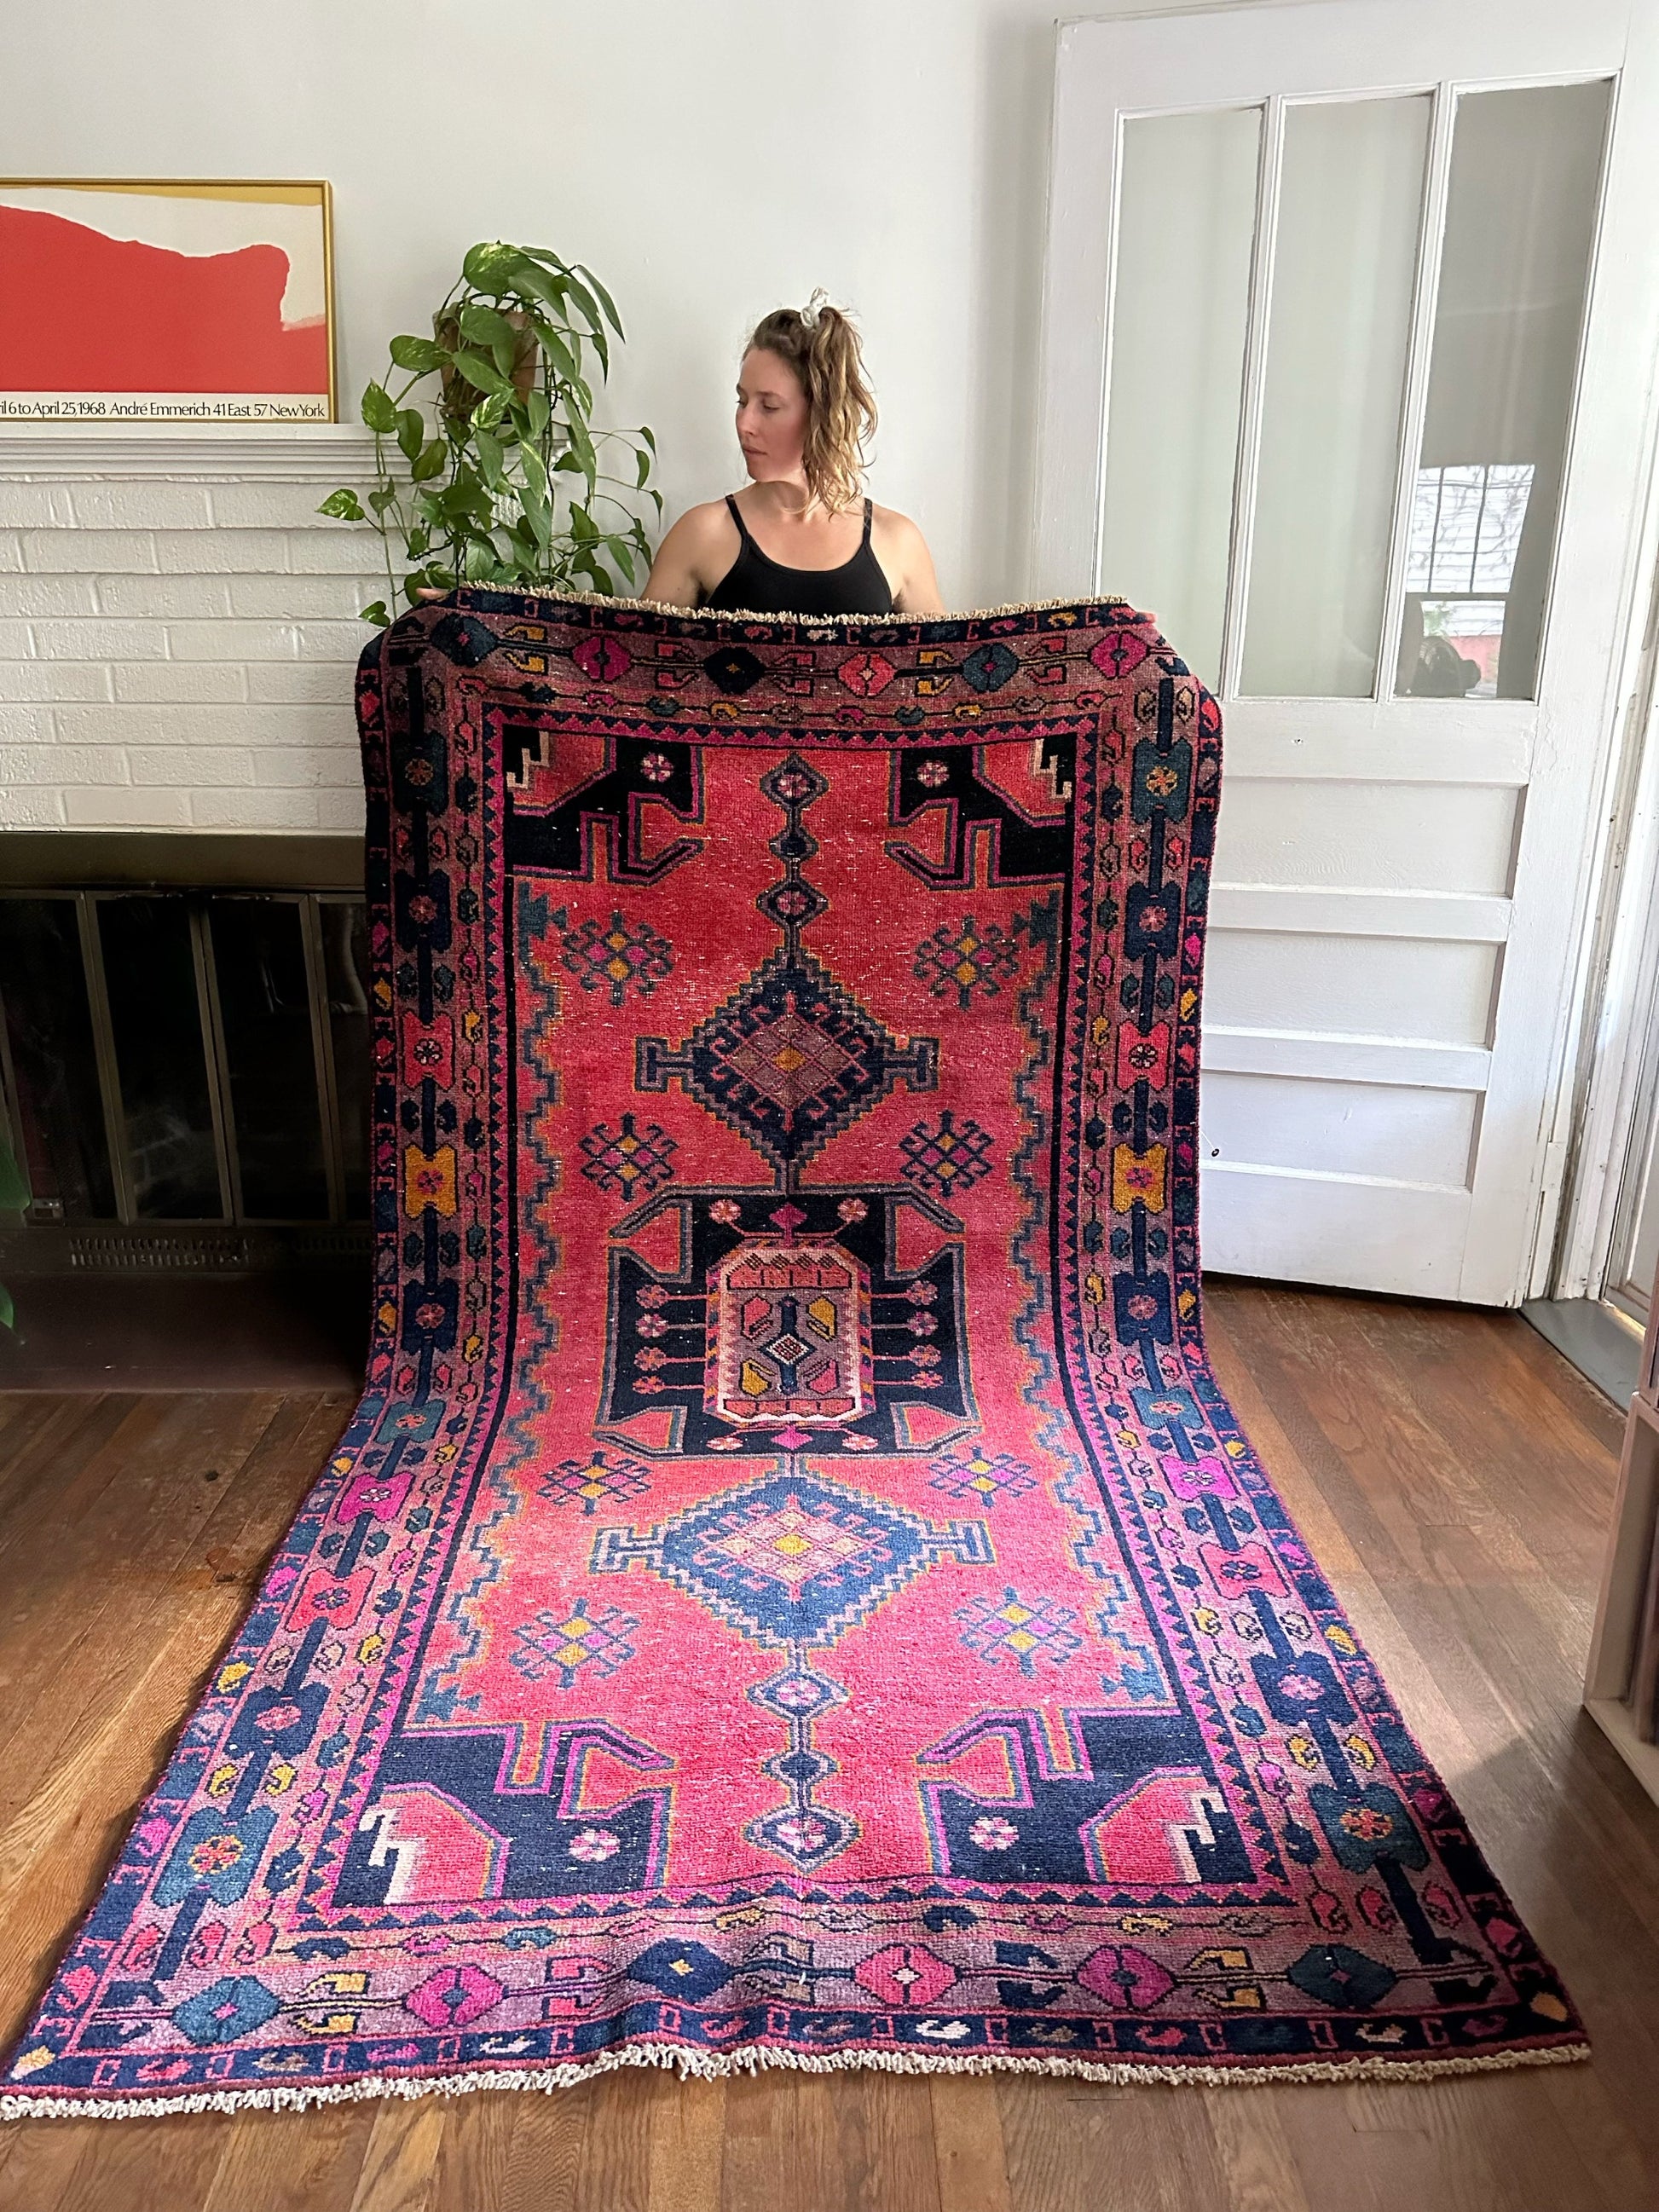 Tamarind Persian Rug is held to see the gorgeous field of motifs